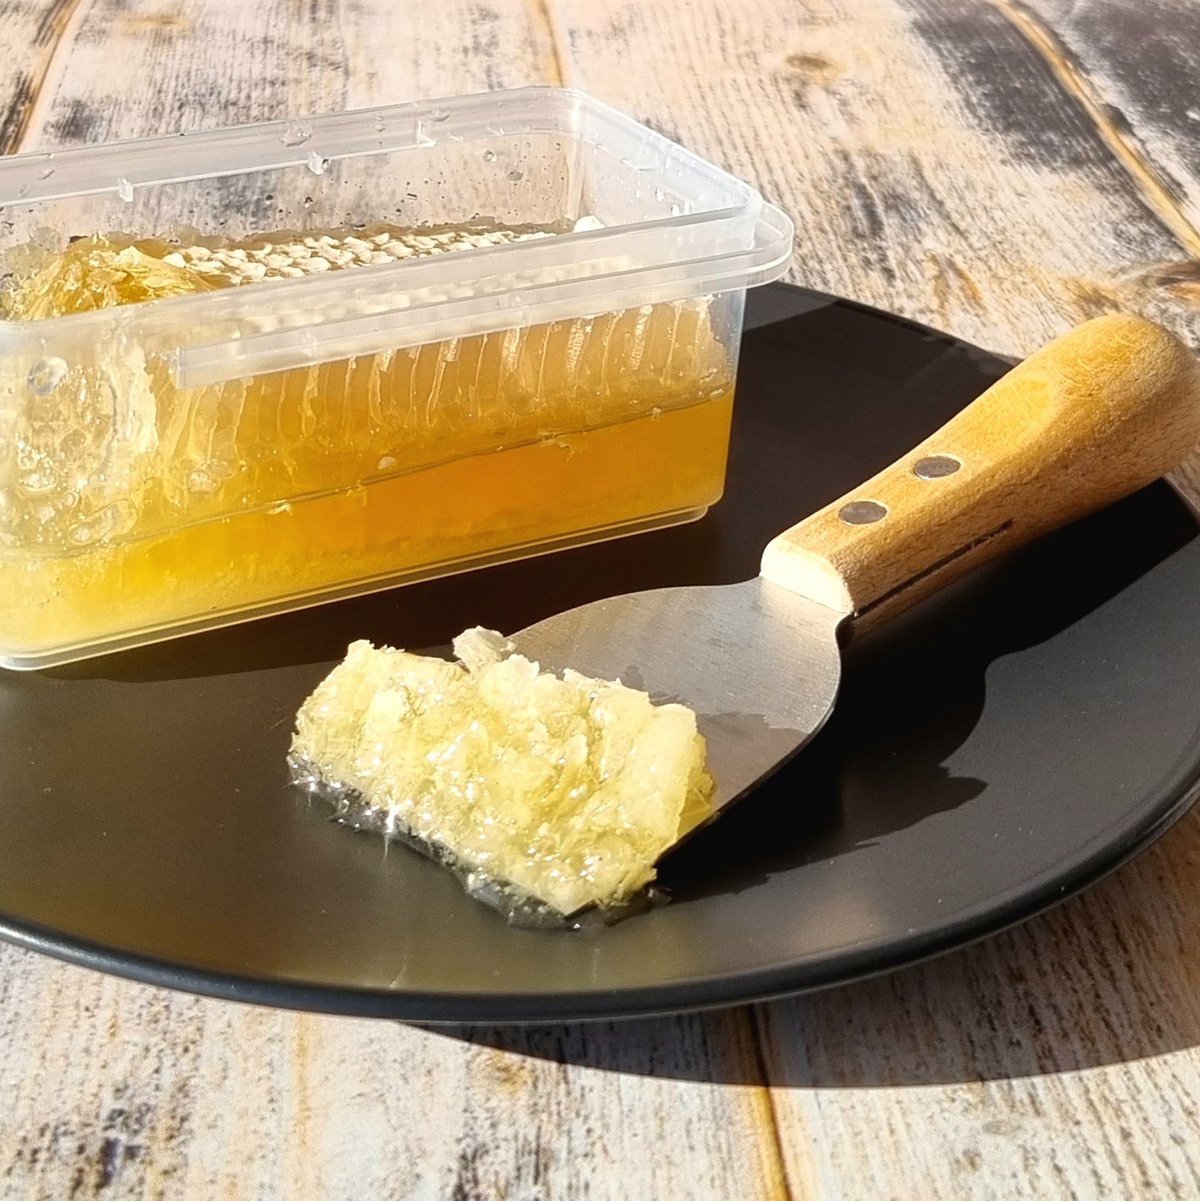 Can you eat it? The Many Health Benefits of Eating Raw Honeycomb